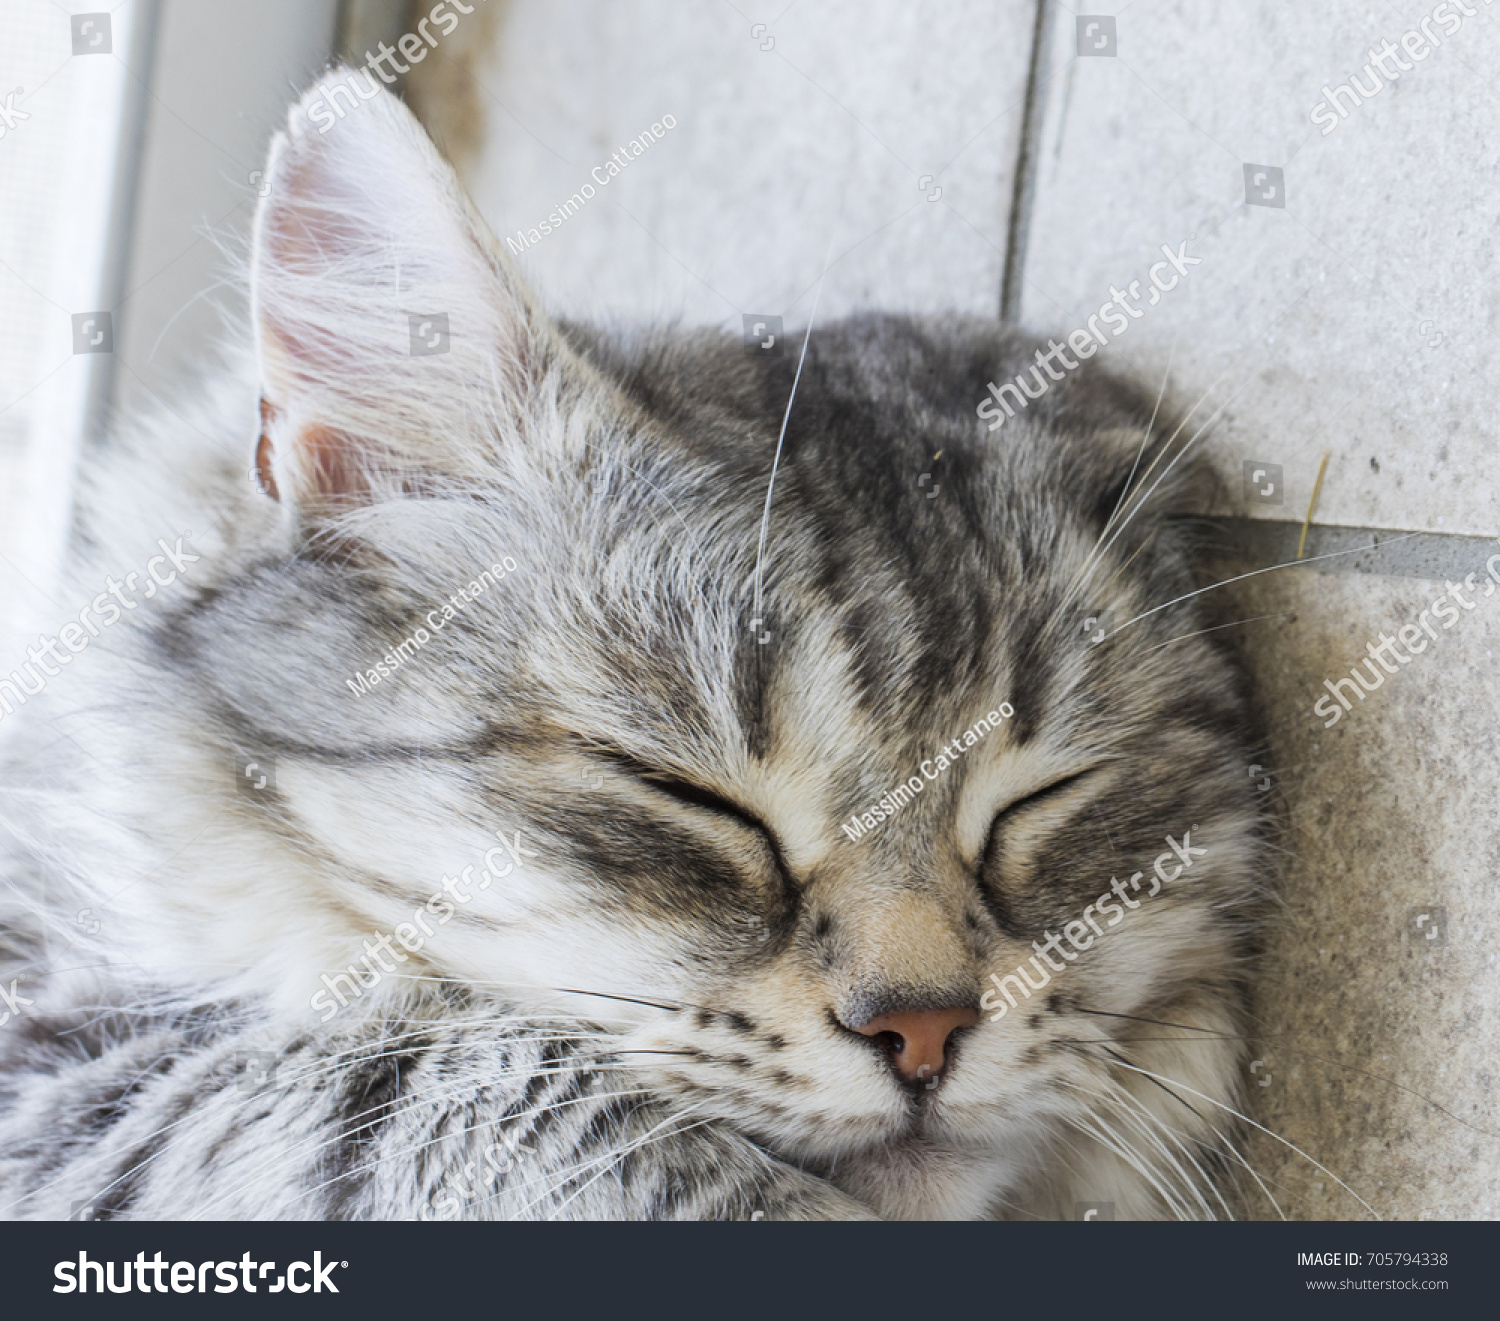 Silver Female Cat Face Sleeping Time Stock Photo 705794338 ...